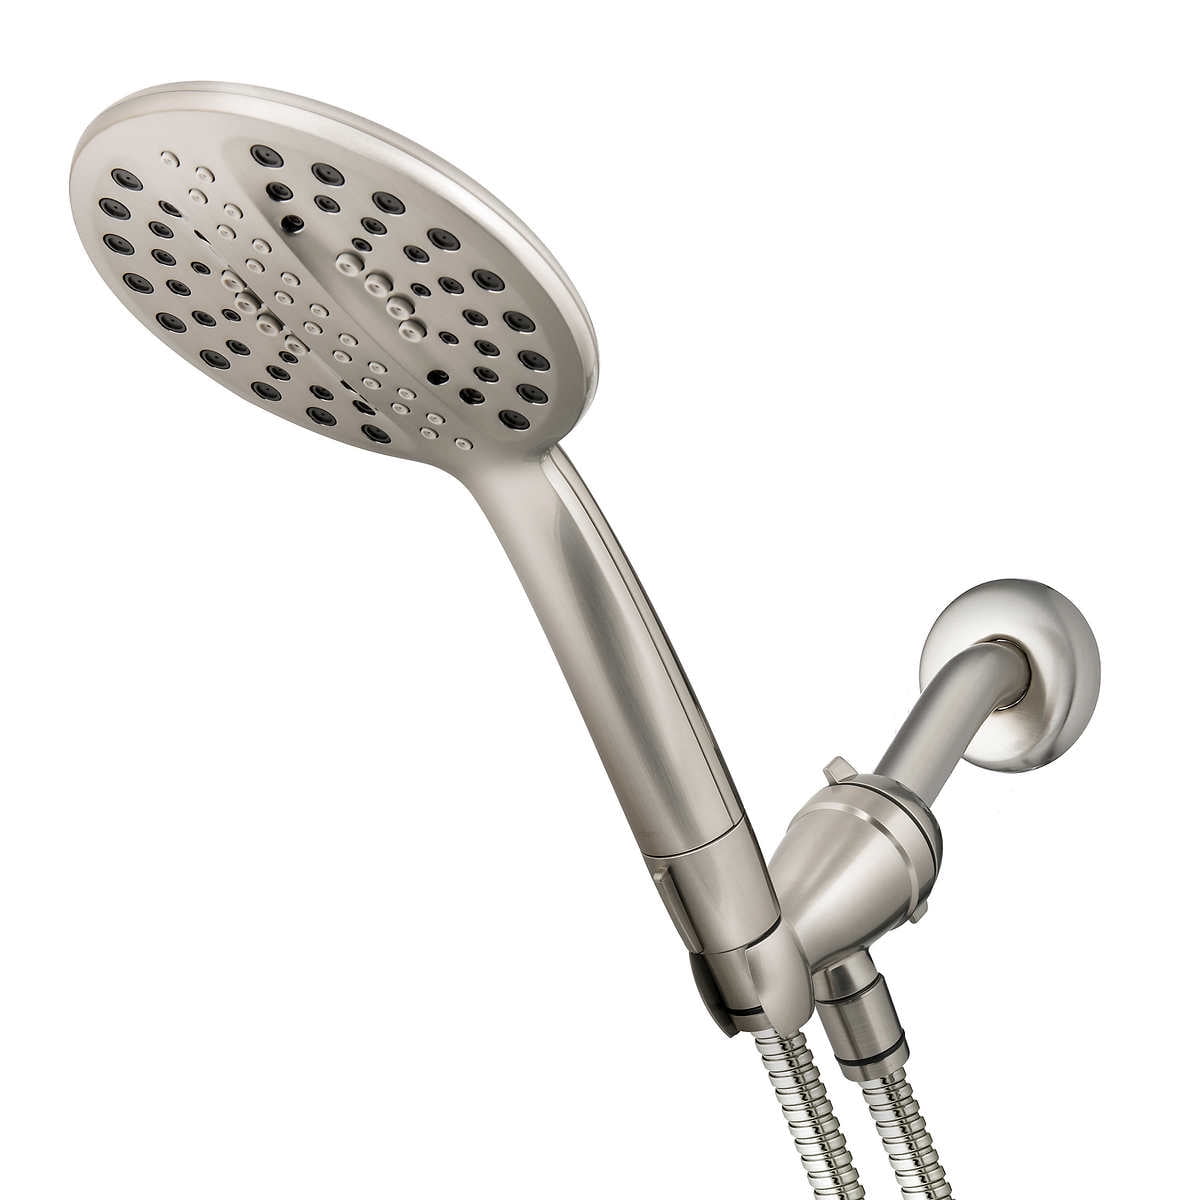 Photo 1 of Waterpik UltraThin + Hand Held Shower Head With PowerPulse Massage. Upgrade your shower experience with the Waterpik HairCare+ Ultrathin Handheld Shower Head ULZ-569ME. With 5 different spray patterns including a relaxing massage option, this modern showe